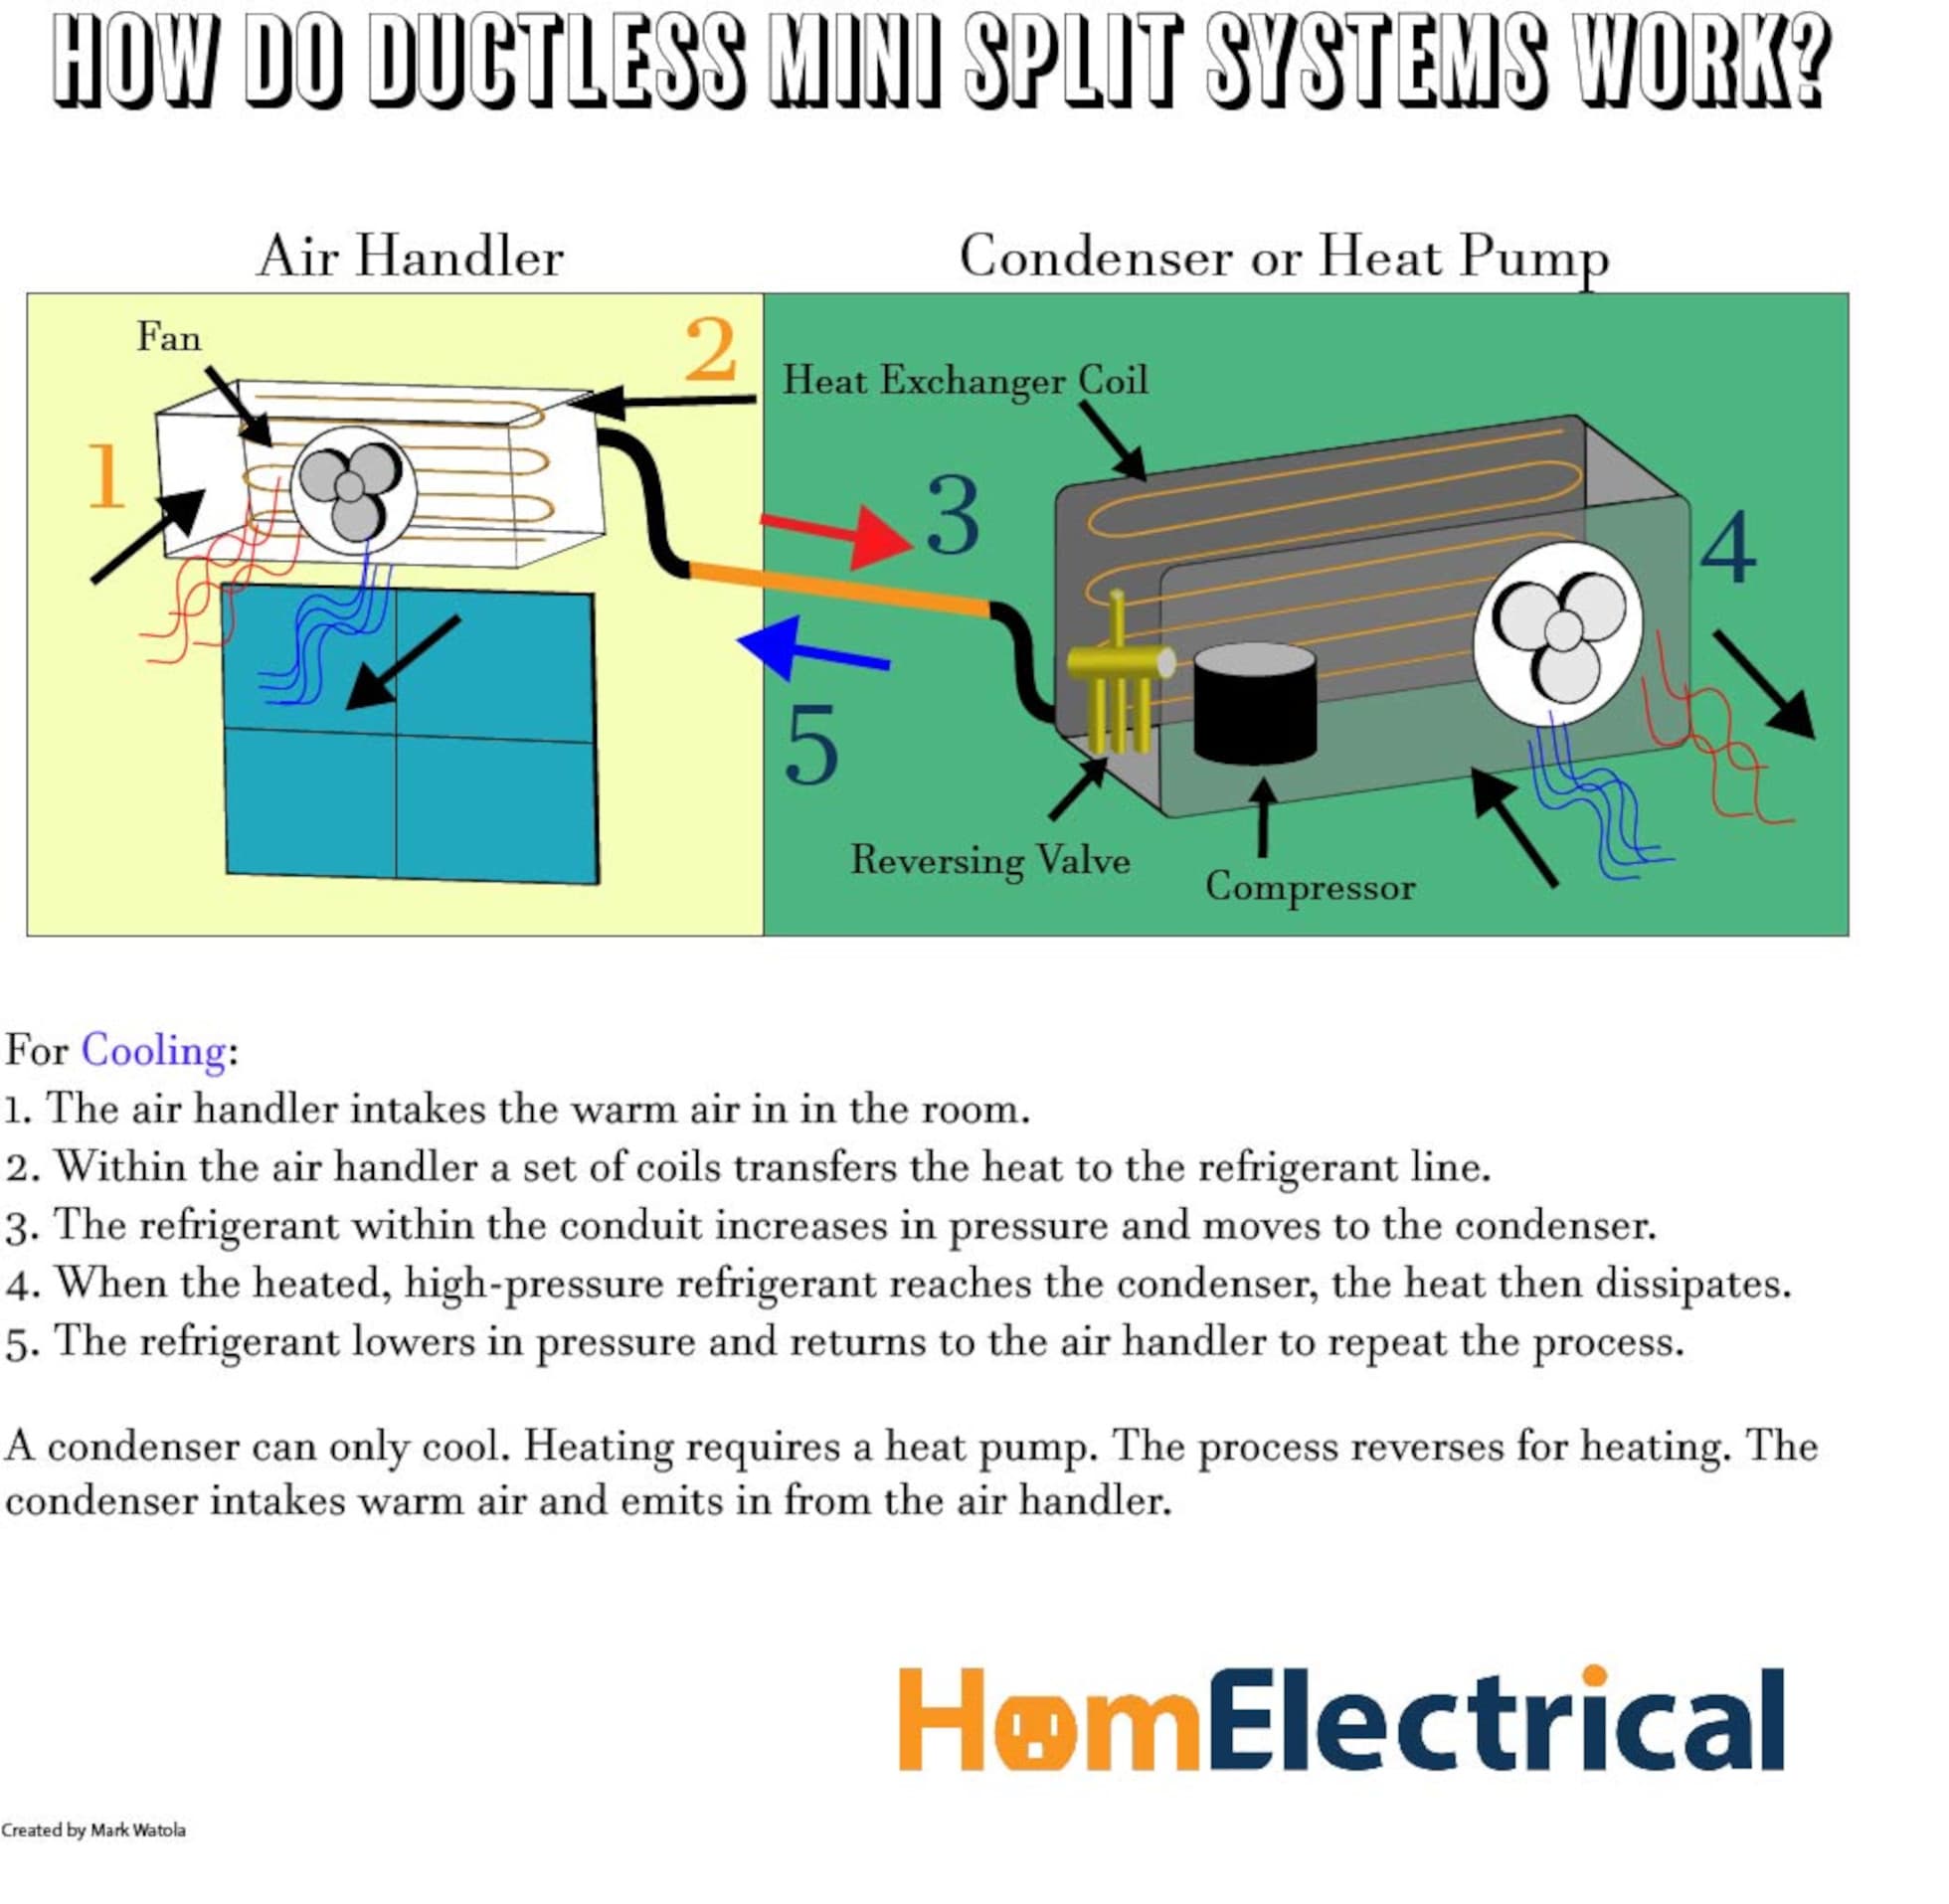 How Does A Ductless Mini Split System Work